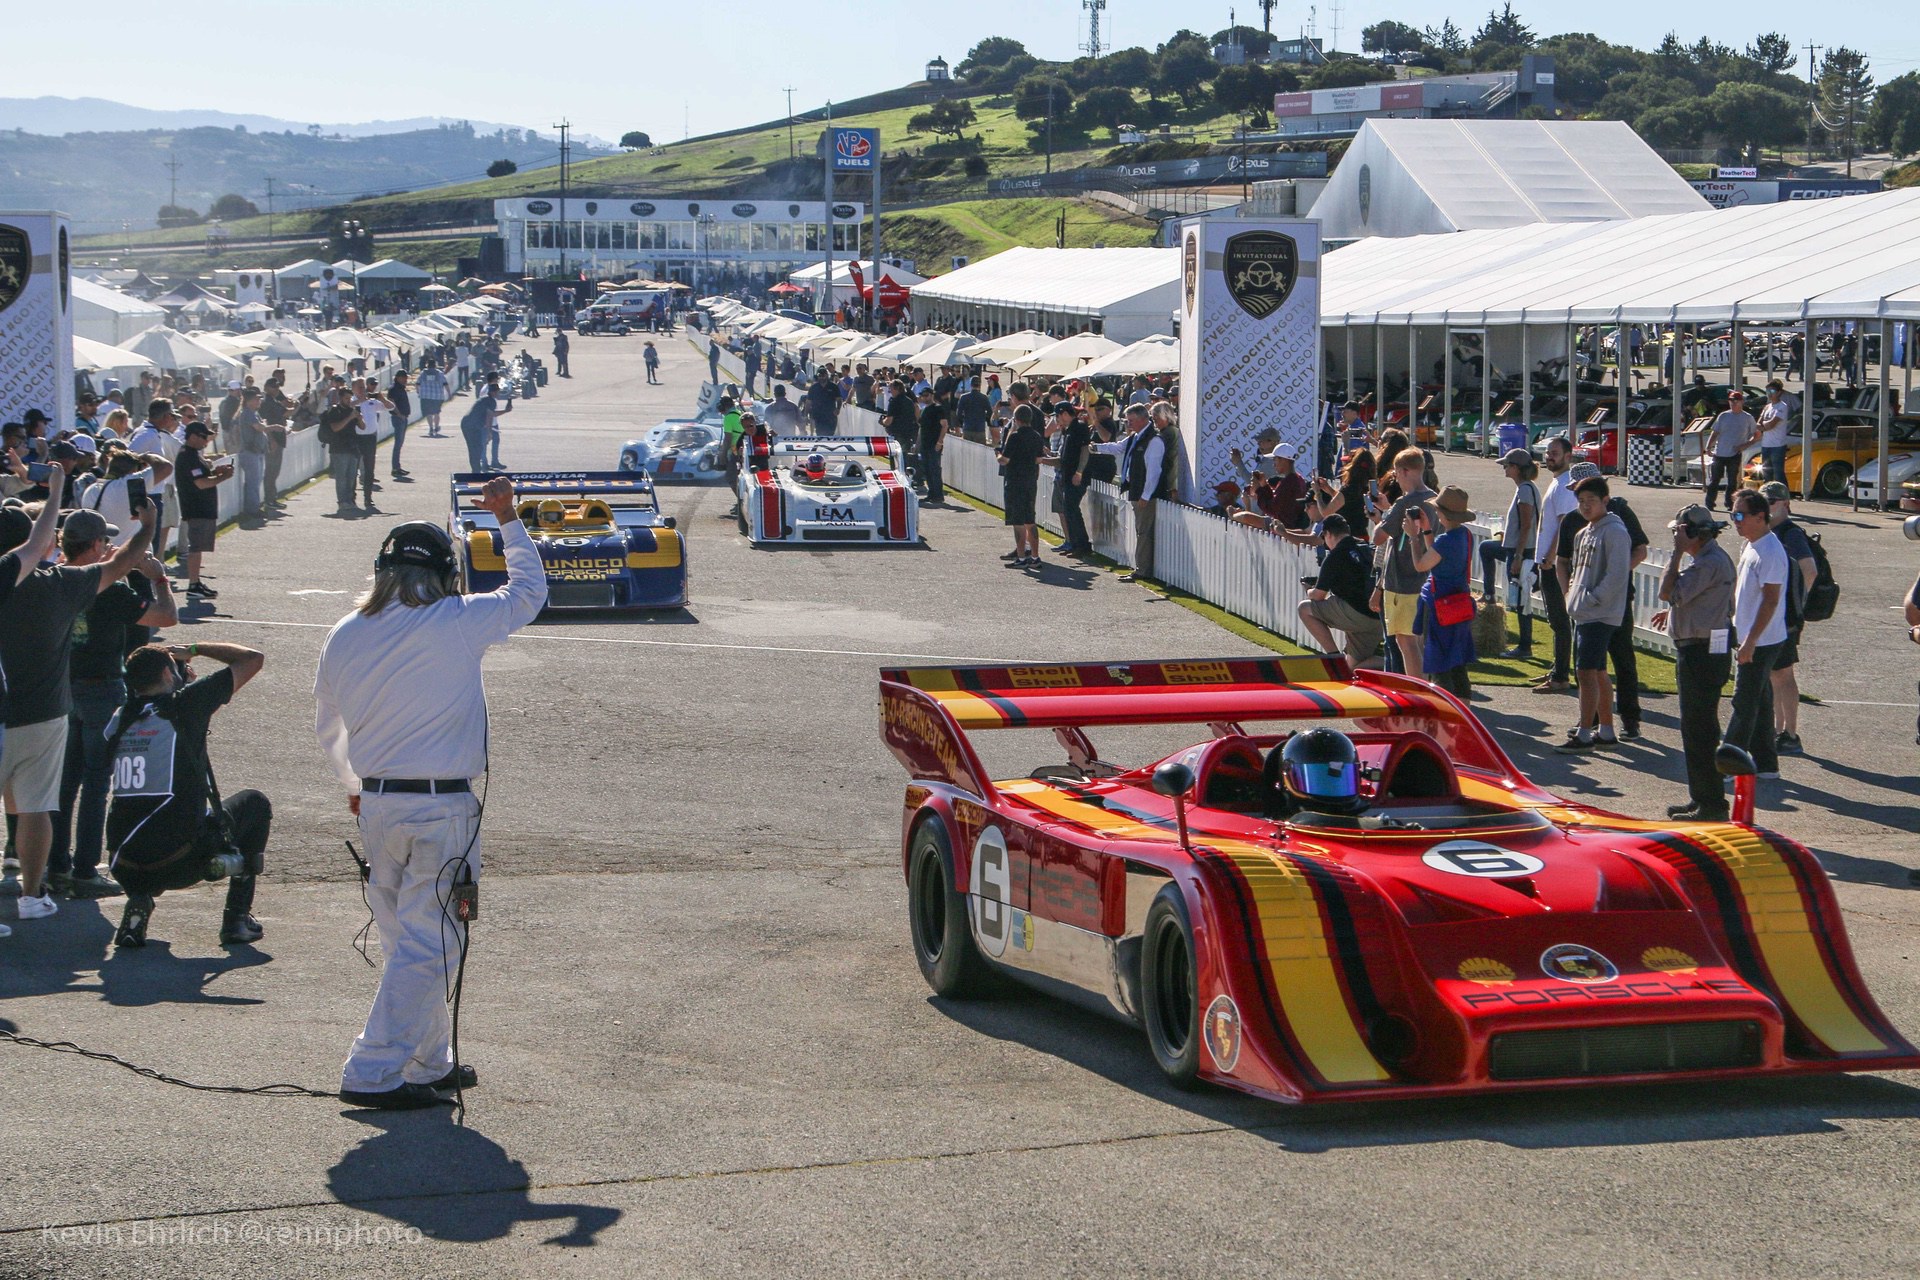 Officials and onlookers near red and yellow Porsche 917 at Velocity Invitational